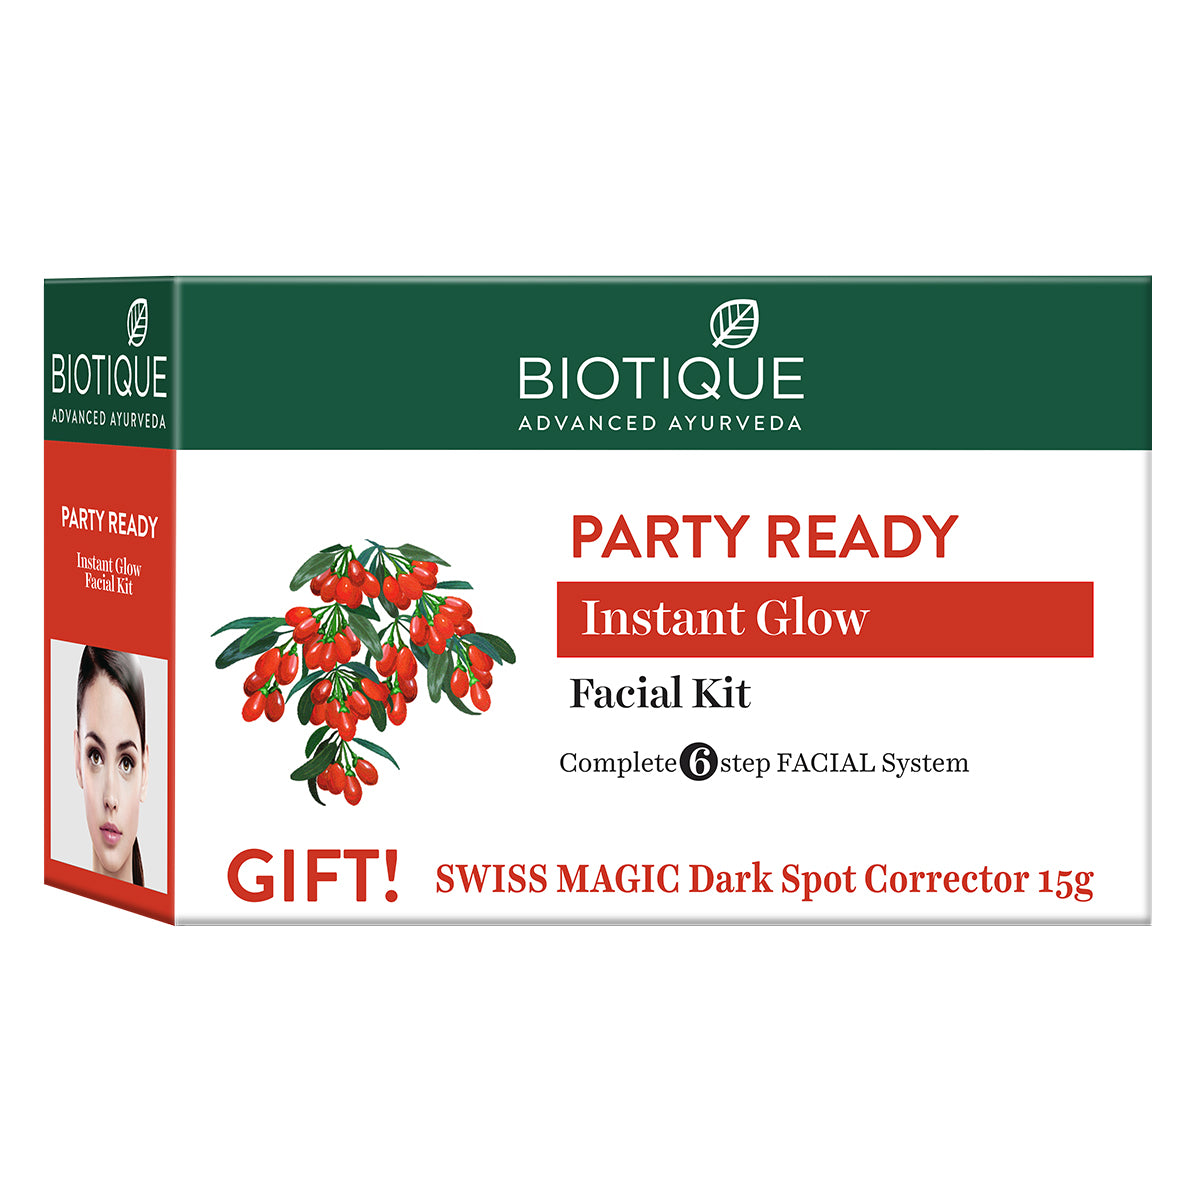 PARTY READY Instant Glow FACIAL KIT 5x10g+15g